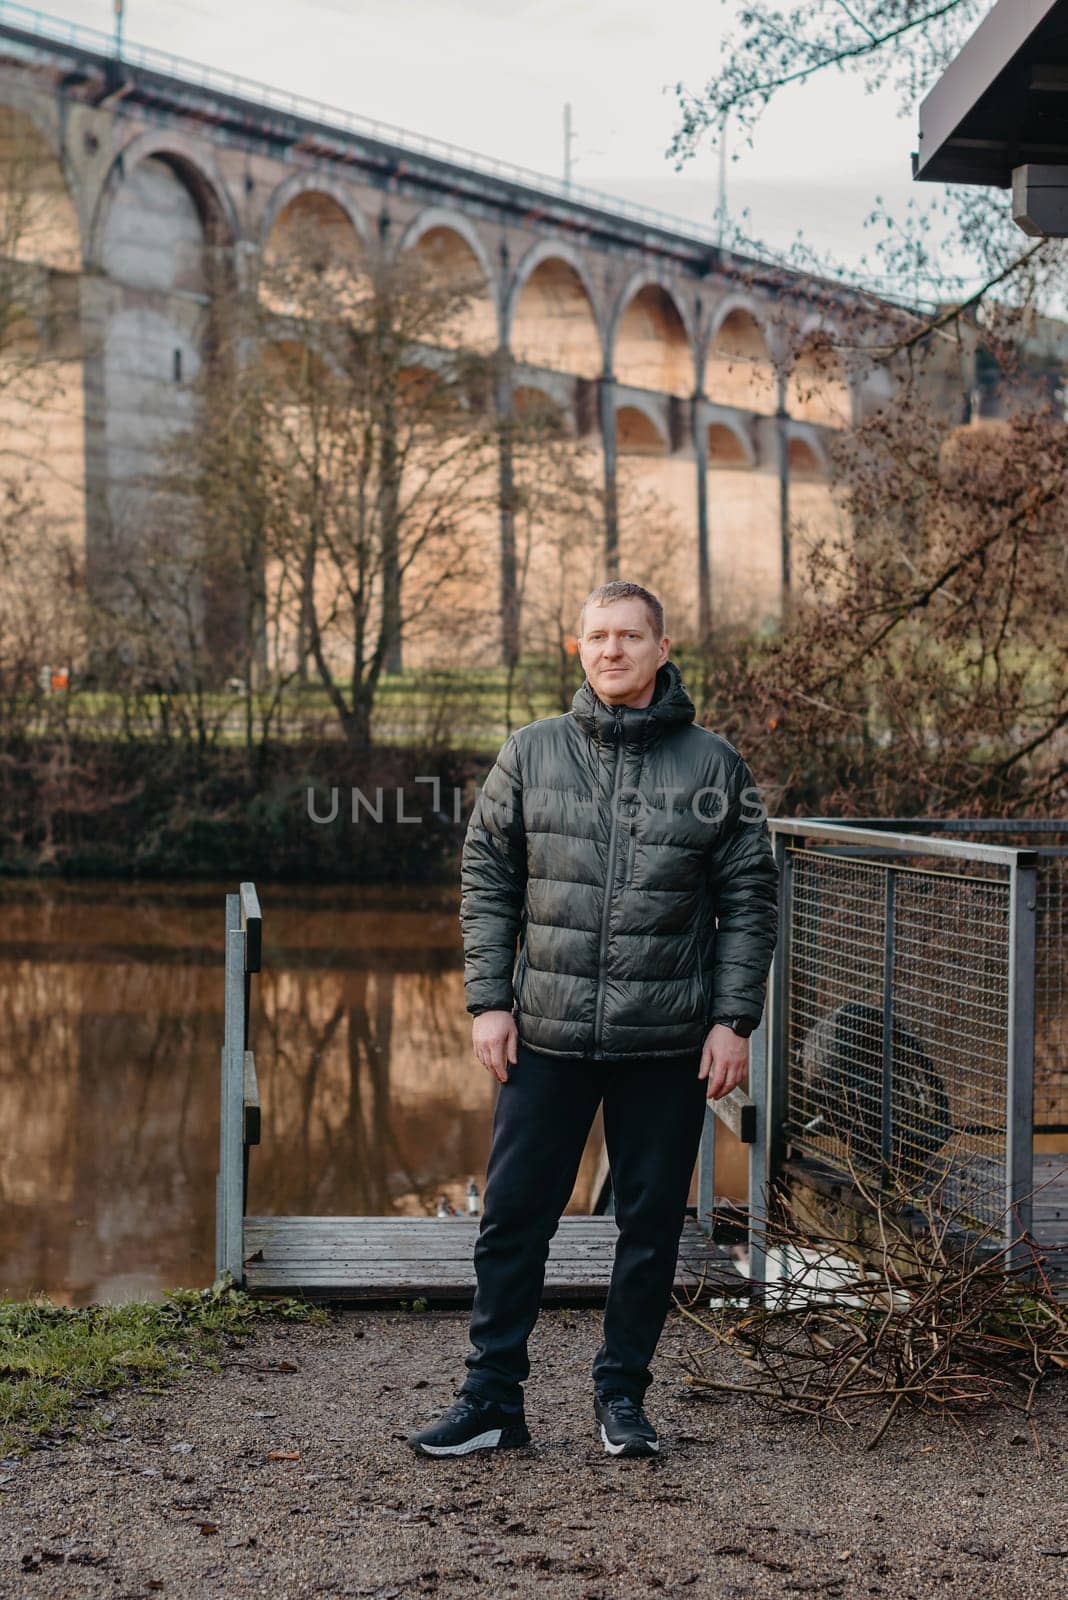 Timeless Elegance: 40-Year-Old Man in Stylish Jacket by Neckar River and Historic Bridge in Bietigheim-Bissingen, Germany. Experience the allure of seasons as a charismatic 40-year-old man stands gracefully by the enchanting Neckar River, adorned in a sophisticated jacket, against the backdrop of historic bridge pillars in the charming city of Bietigheim-Bissingen, Germany. This captivating image seamlessly blends timeless elegance with the scenic beauty of autumn or winter, creating a picturesque scene of urban exploration and mature style in the heart of German heritage